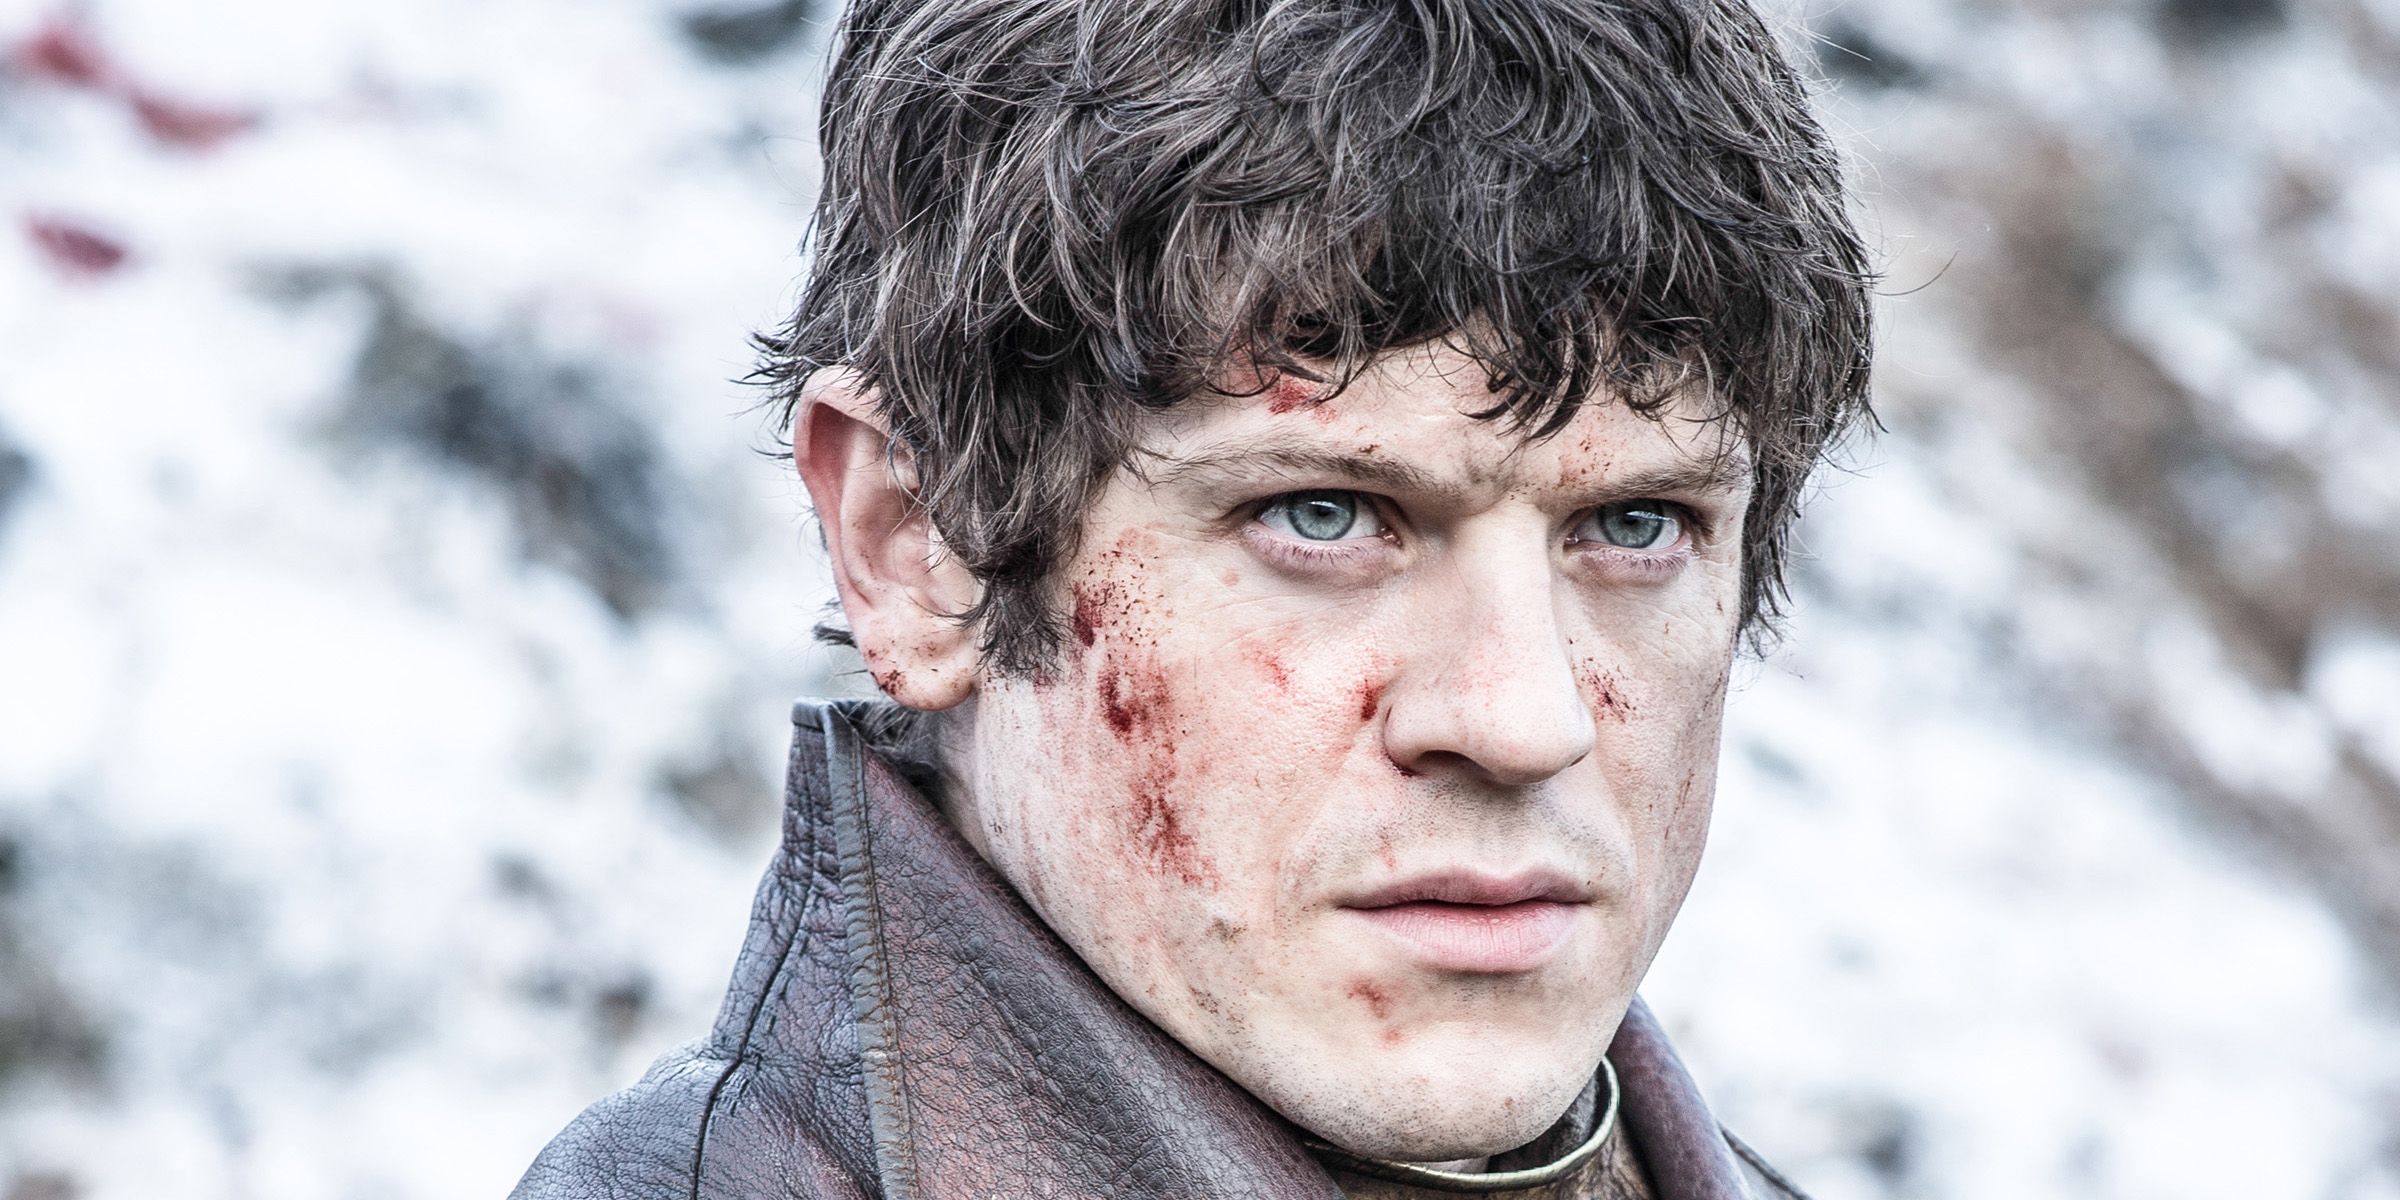 Ramsay Bolton with blood on his face and a serious expression in Game of Thrones.